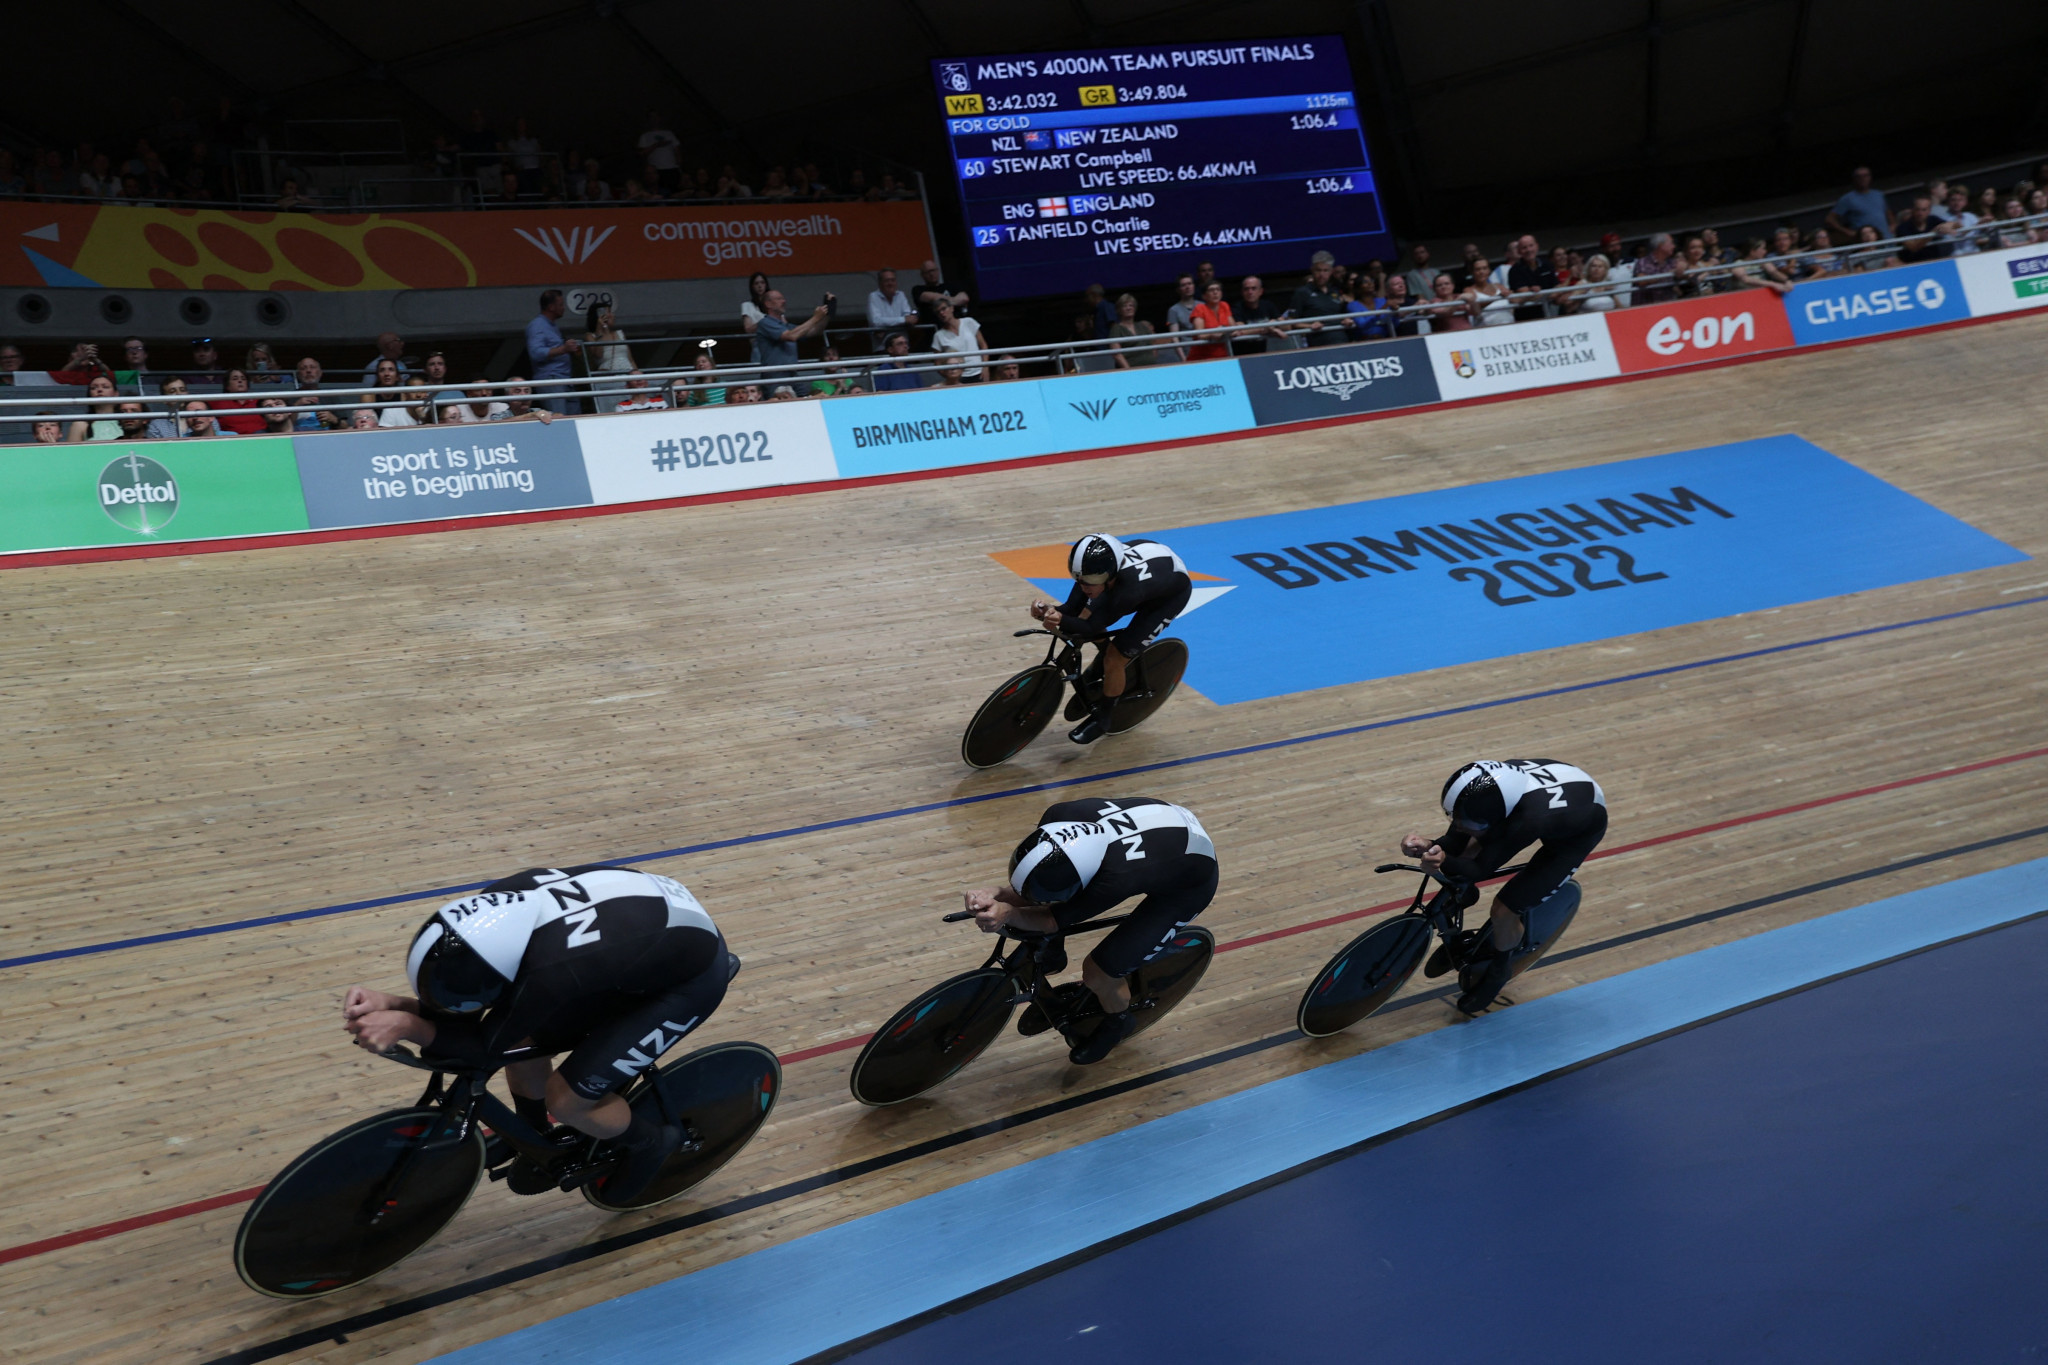 New Zealand's track cyclists won 13 out of the country's total 49 medals at Birmingham 2022 ©Getty Images